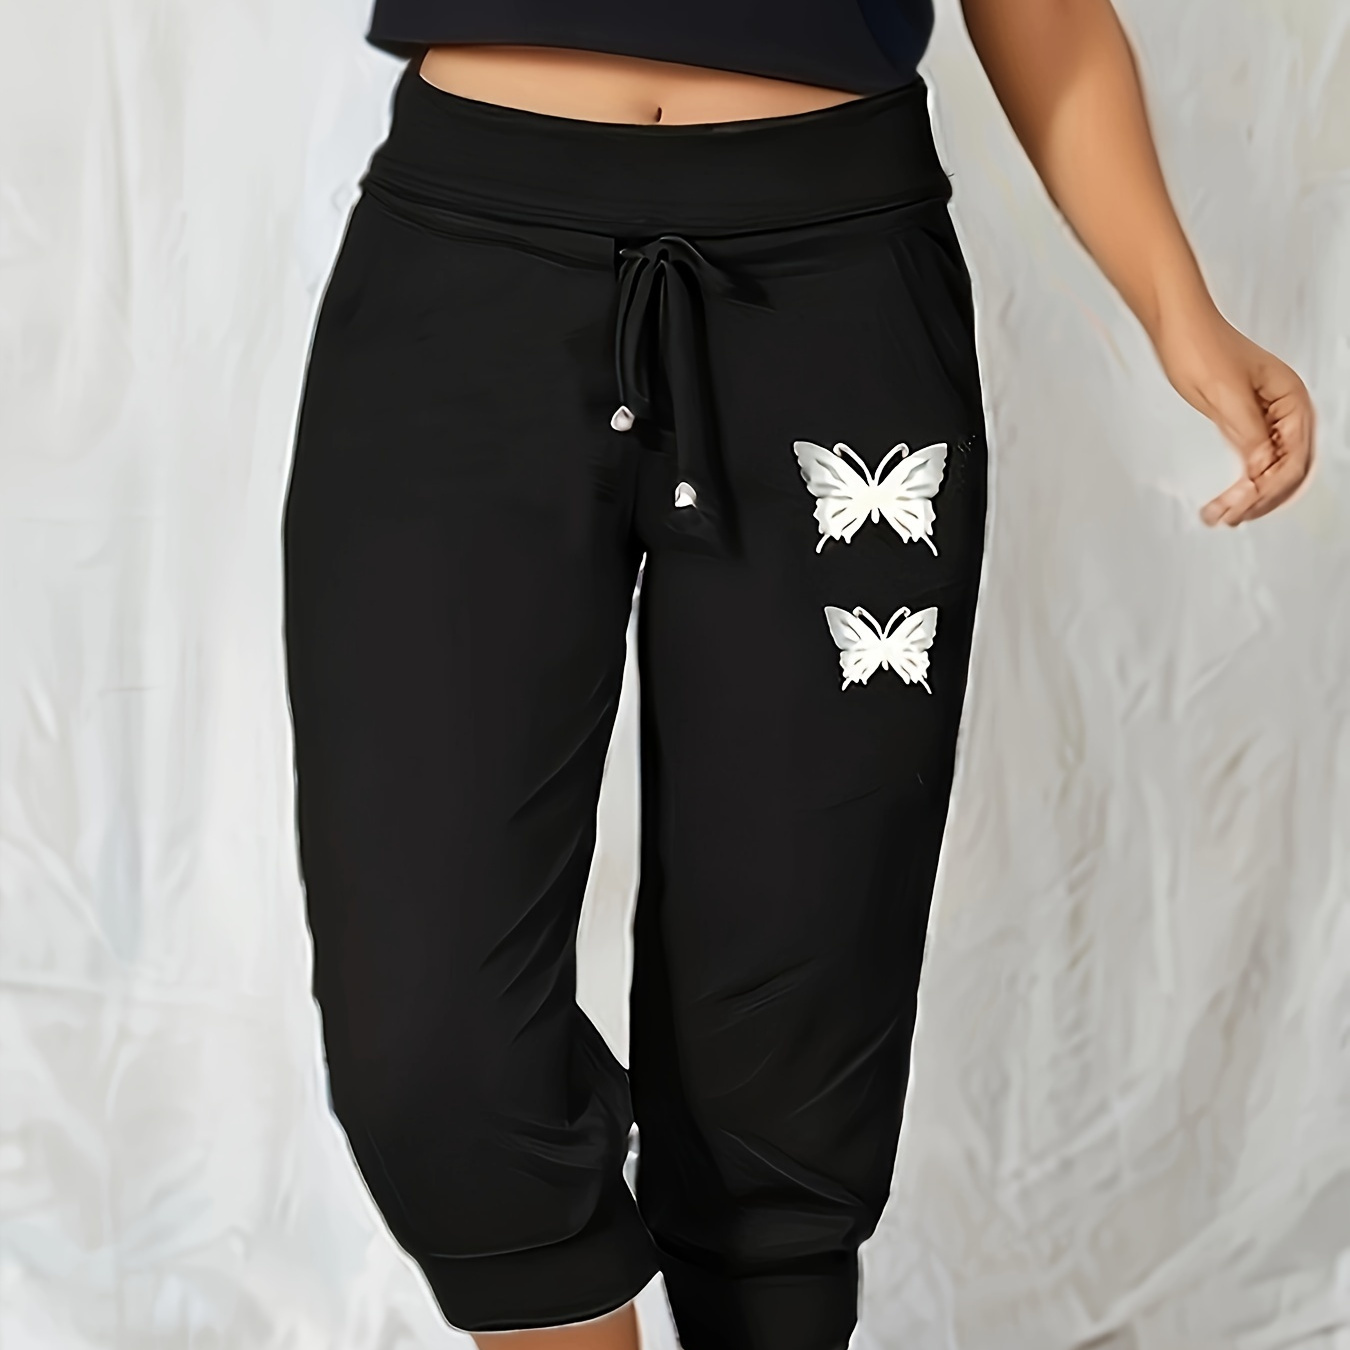 

Butterfly Print Cropped Pants, Casual Drawstring Waist Capris Pants, Women's Clothing